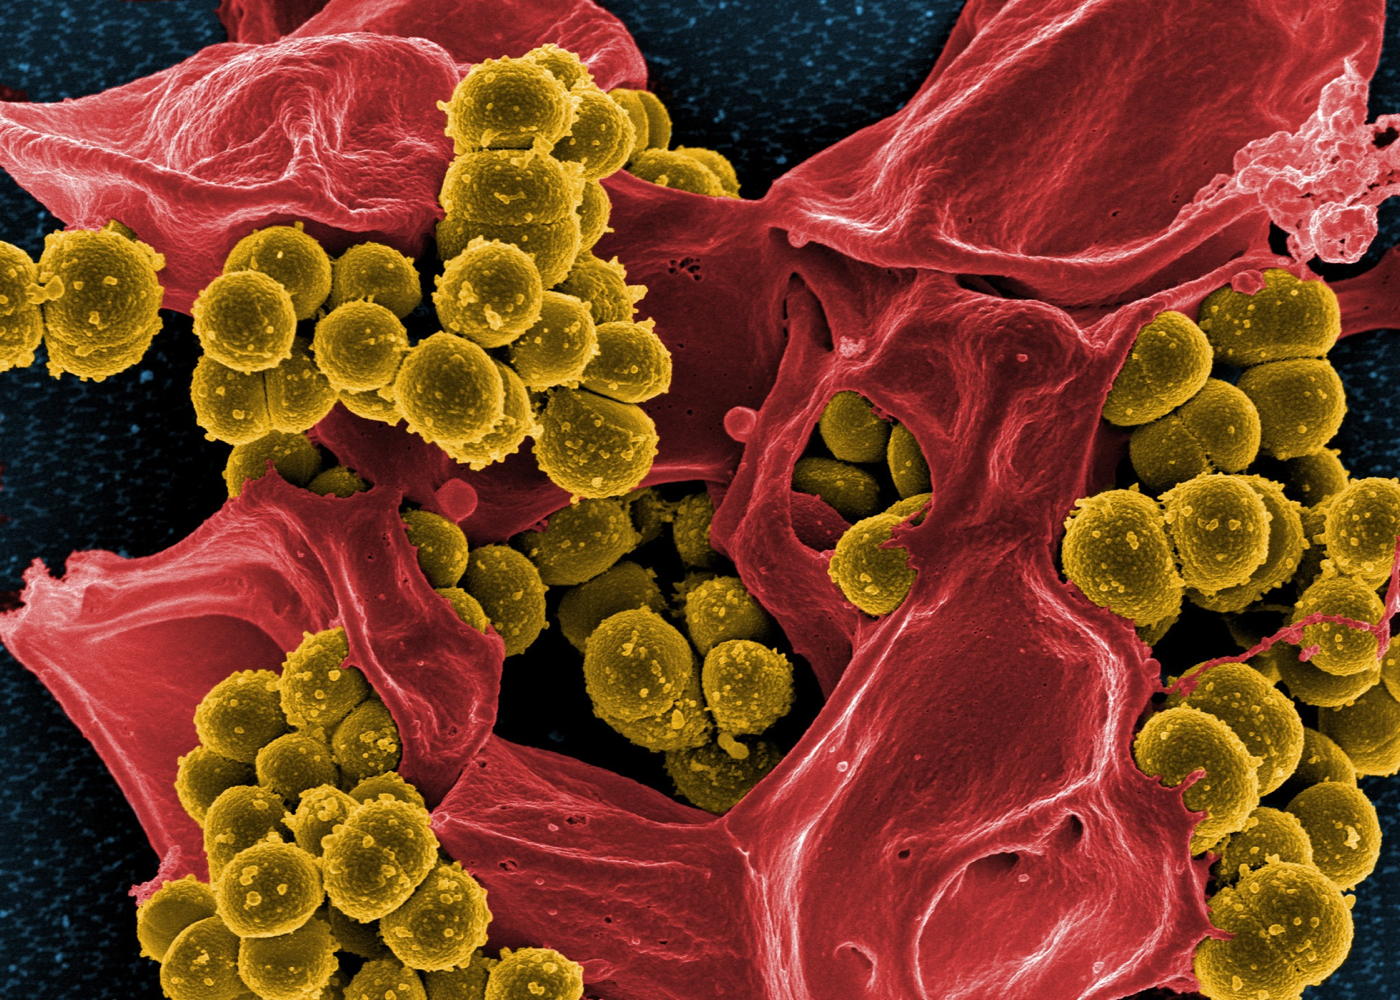 Methicillin-resistant Staph bacteria: “Scanning electron micrograph of methicillin-resistant Staphylococcus aureus bacteria (yellow) and a dead human white blood cell (colored red.)” From the National Institute of Allergy and Infectious Diseases (NIAID)/NIH, June 30, 2006.; antibiotics; bacteria